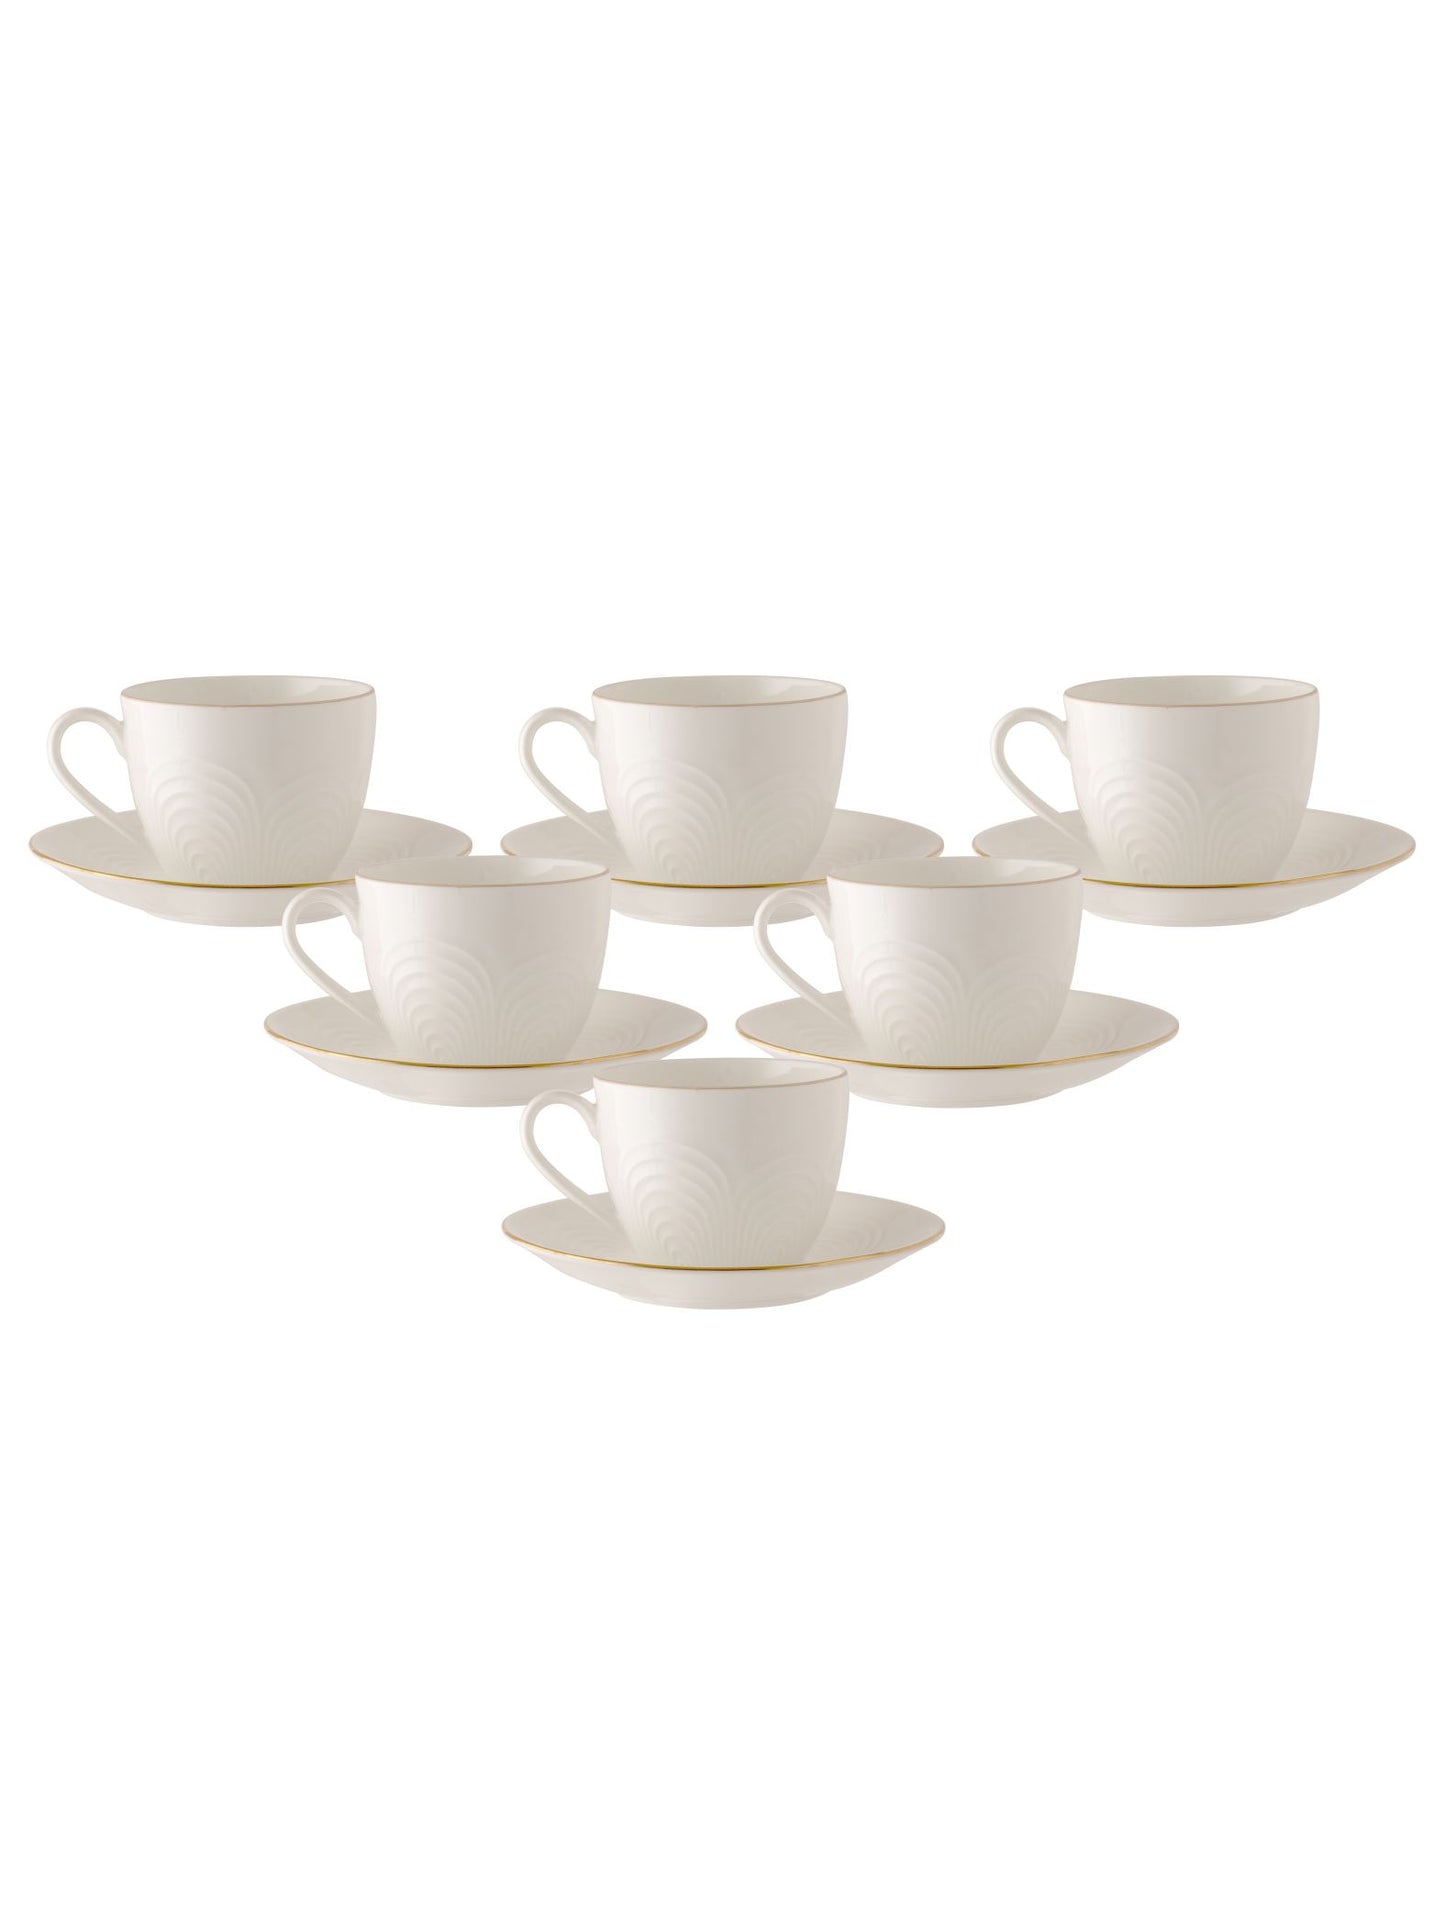 Palm Impression Cup & Saucer, 170ml, Set of 12 (6 Cups + 6 Saucers) (1101)